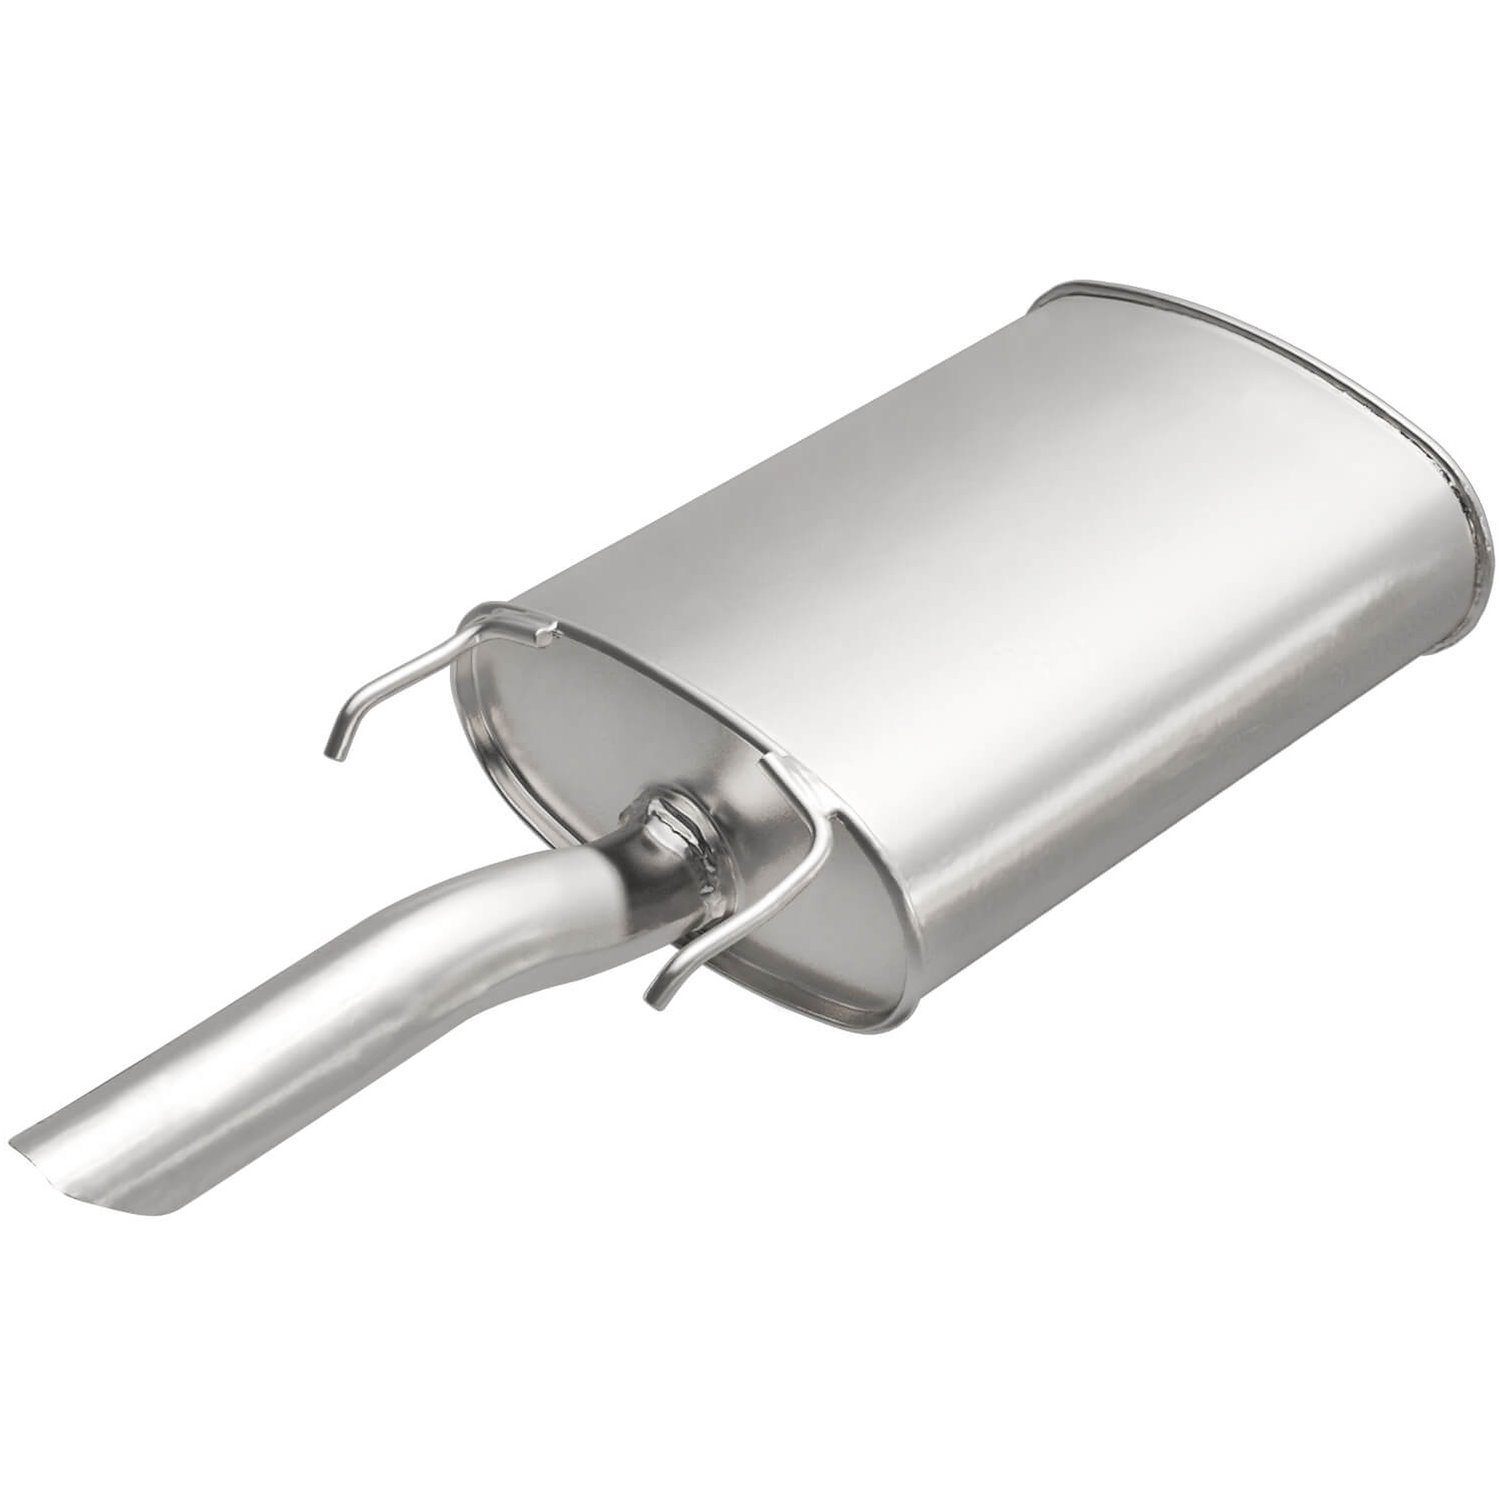 Direct-Fit Exhaust Muffler, 2006-2011 Chevy Impala/Monte Carlo 3.5L